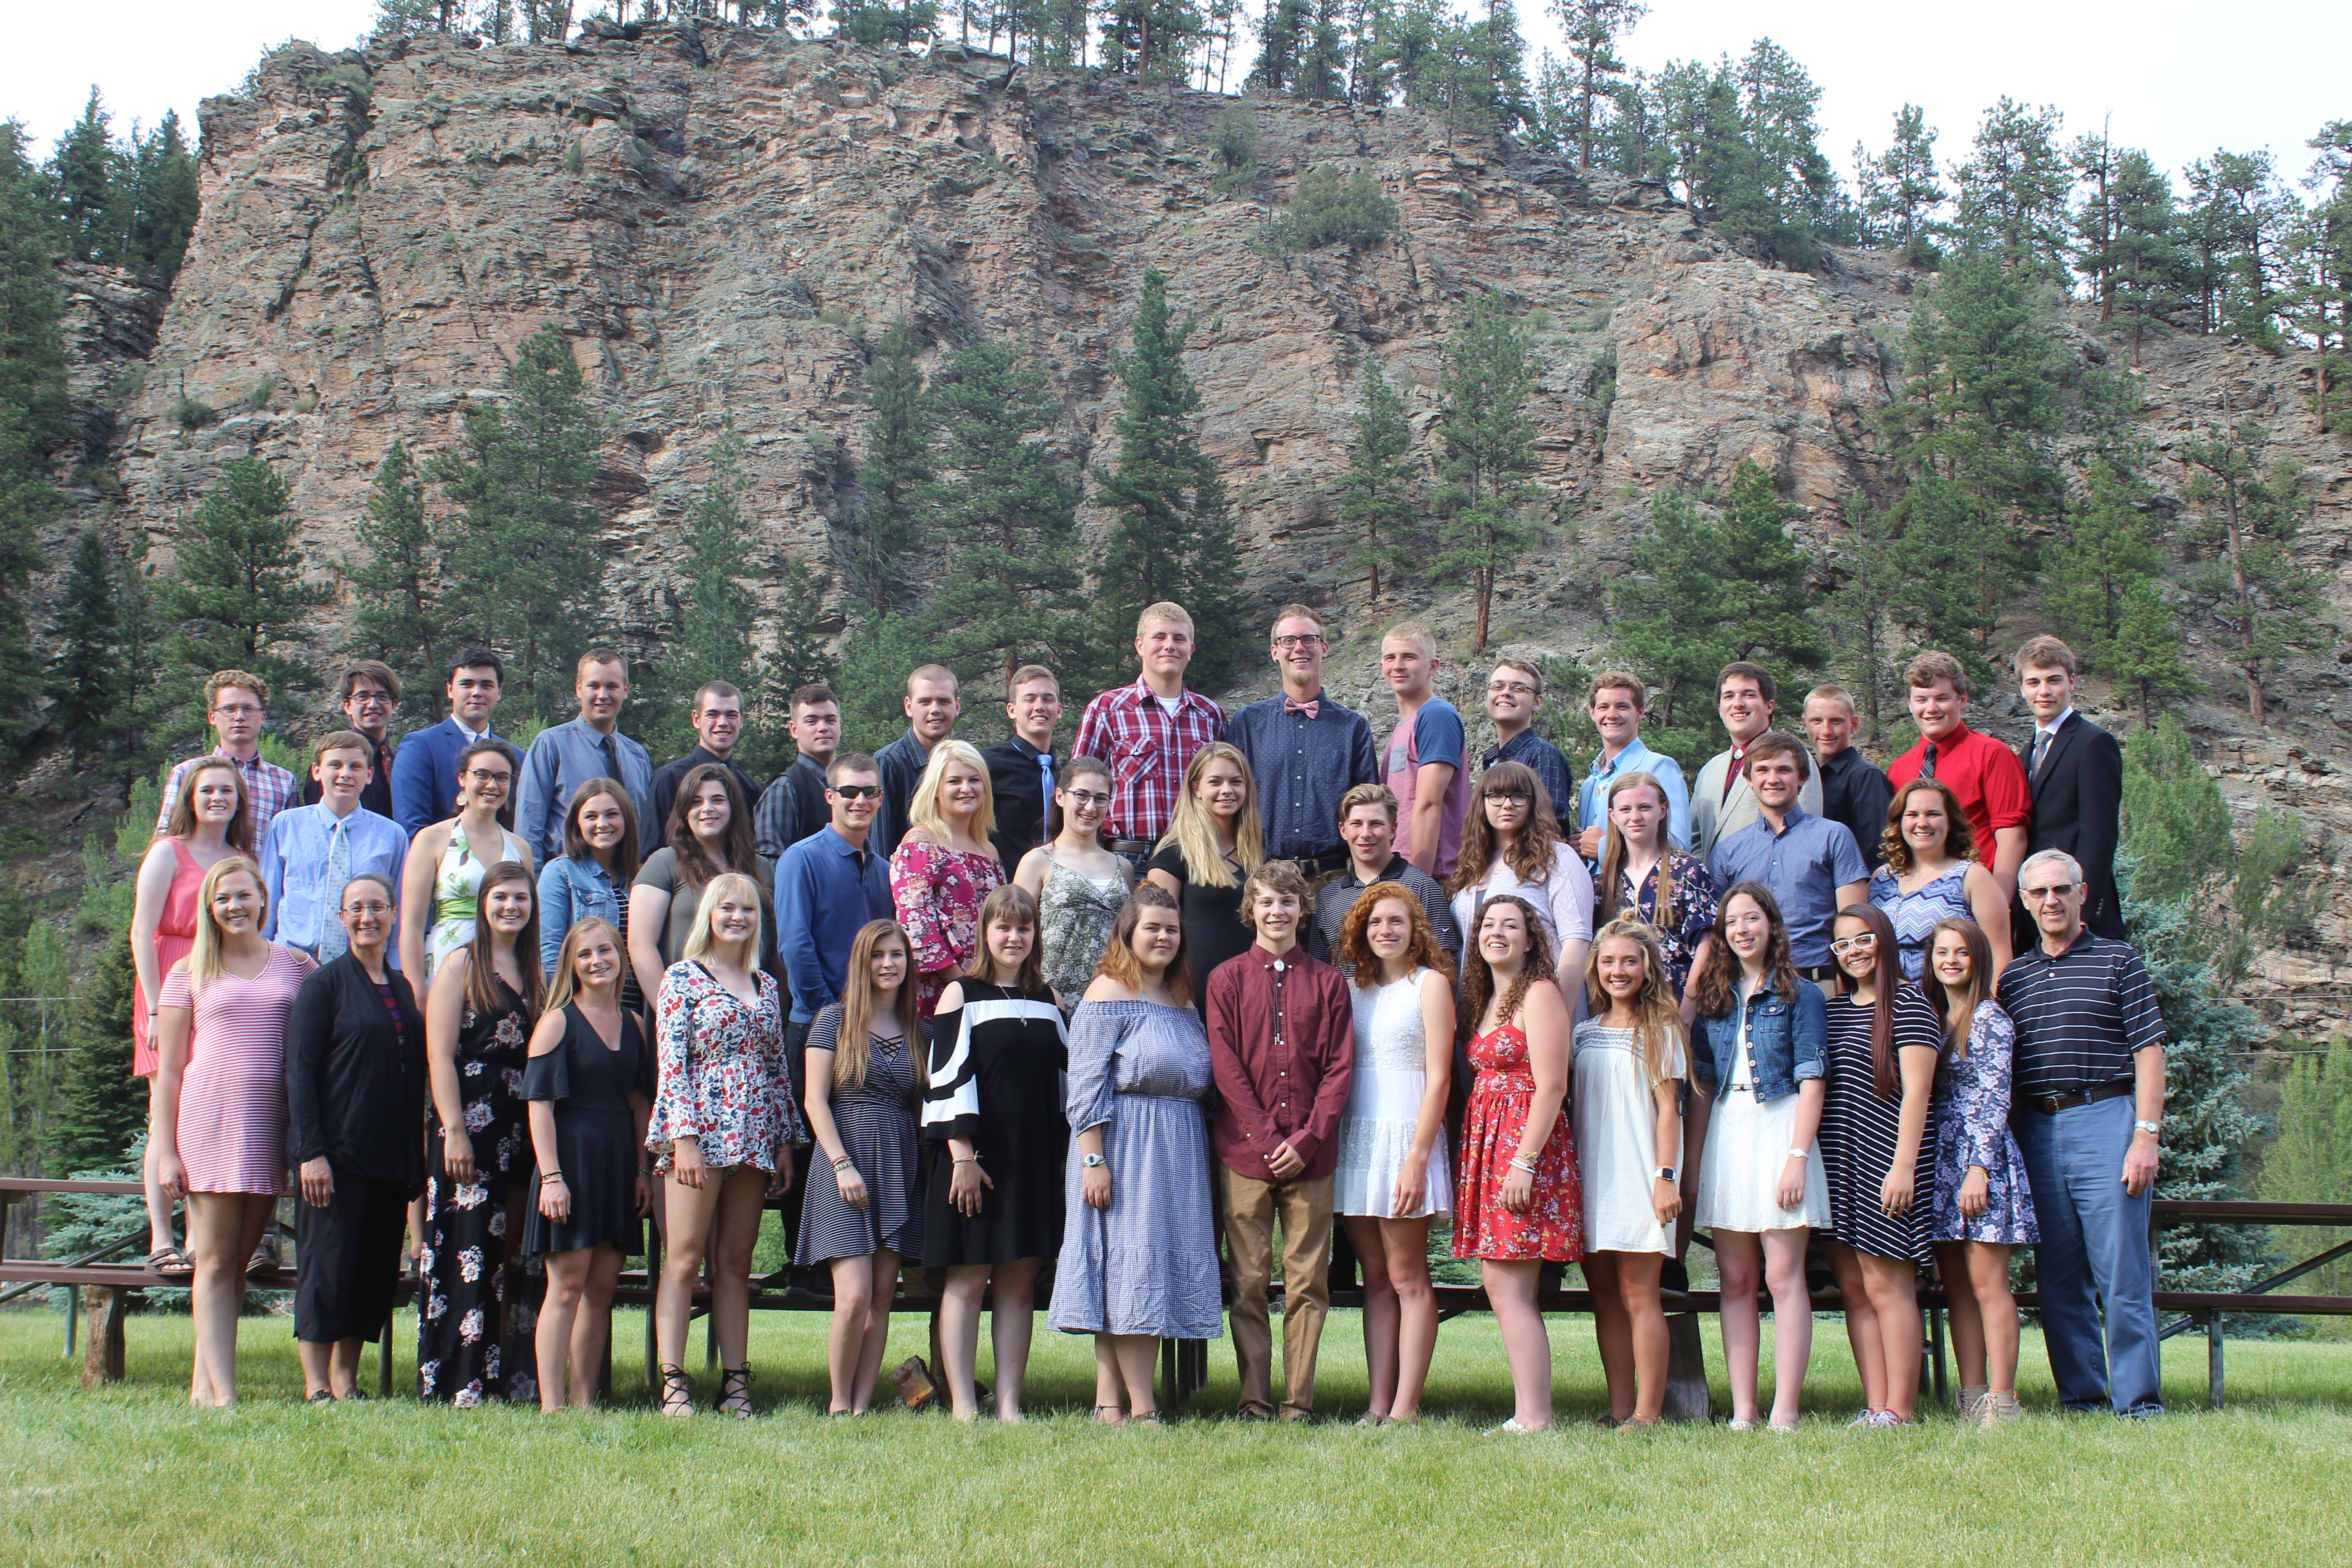 Farmers Union Hosts 82nd Annual All-States Leadership Camp